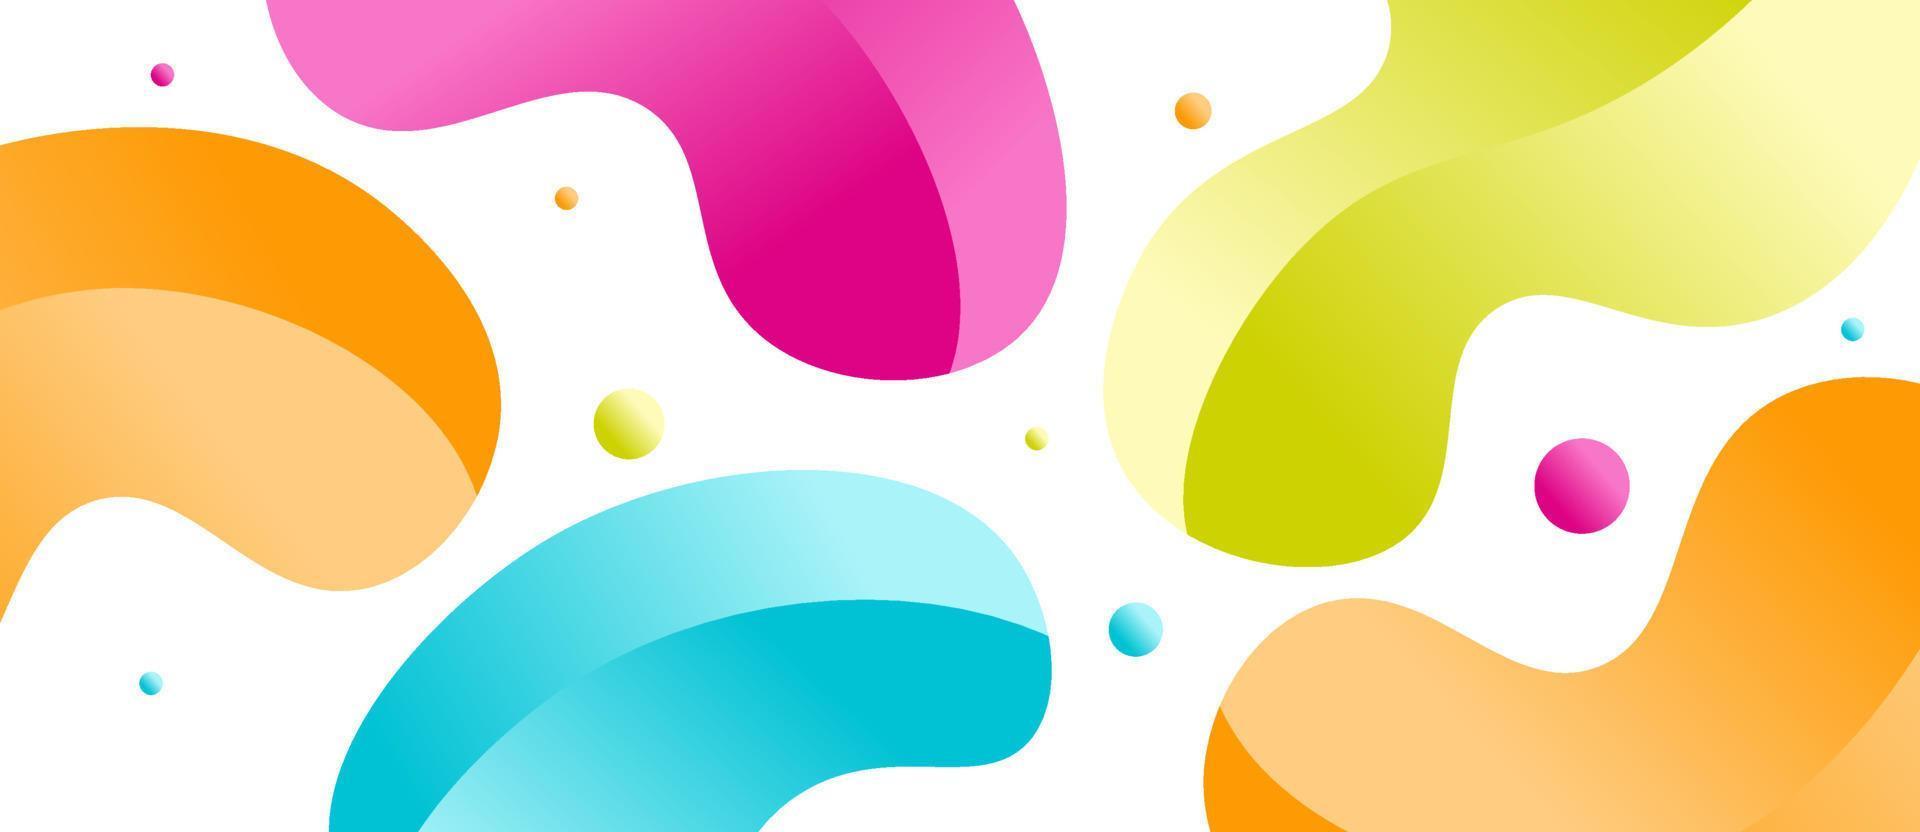 Colorful liquid blots abstract background vector design. Futuristic dynamic shapes.